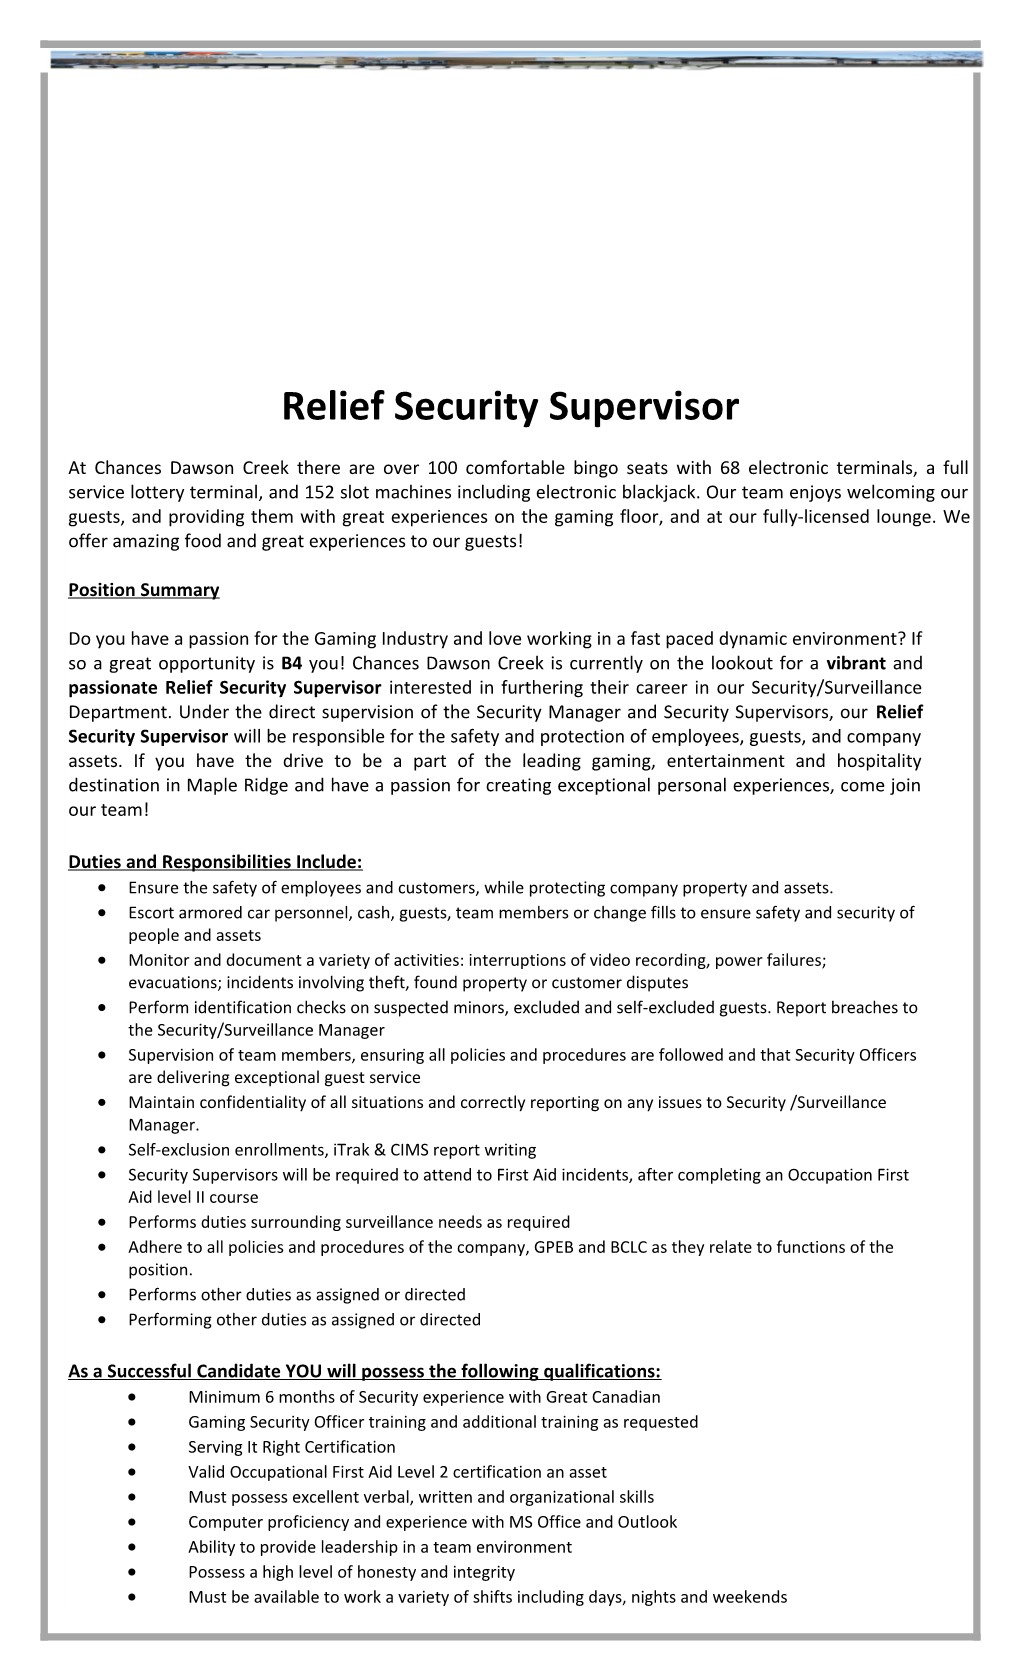 Relief Security Supervisor